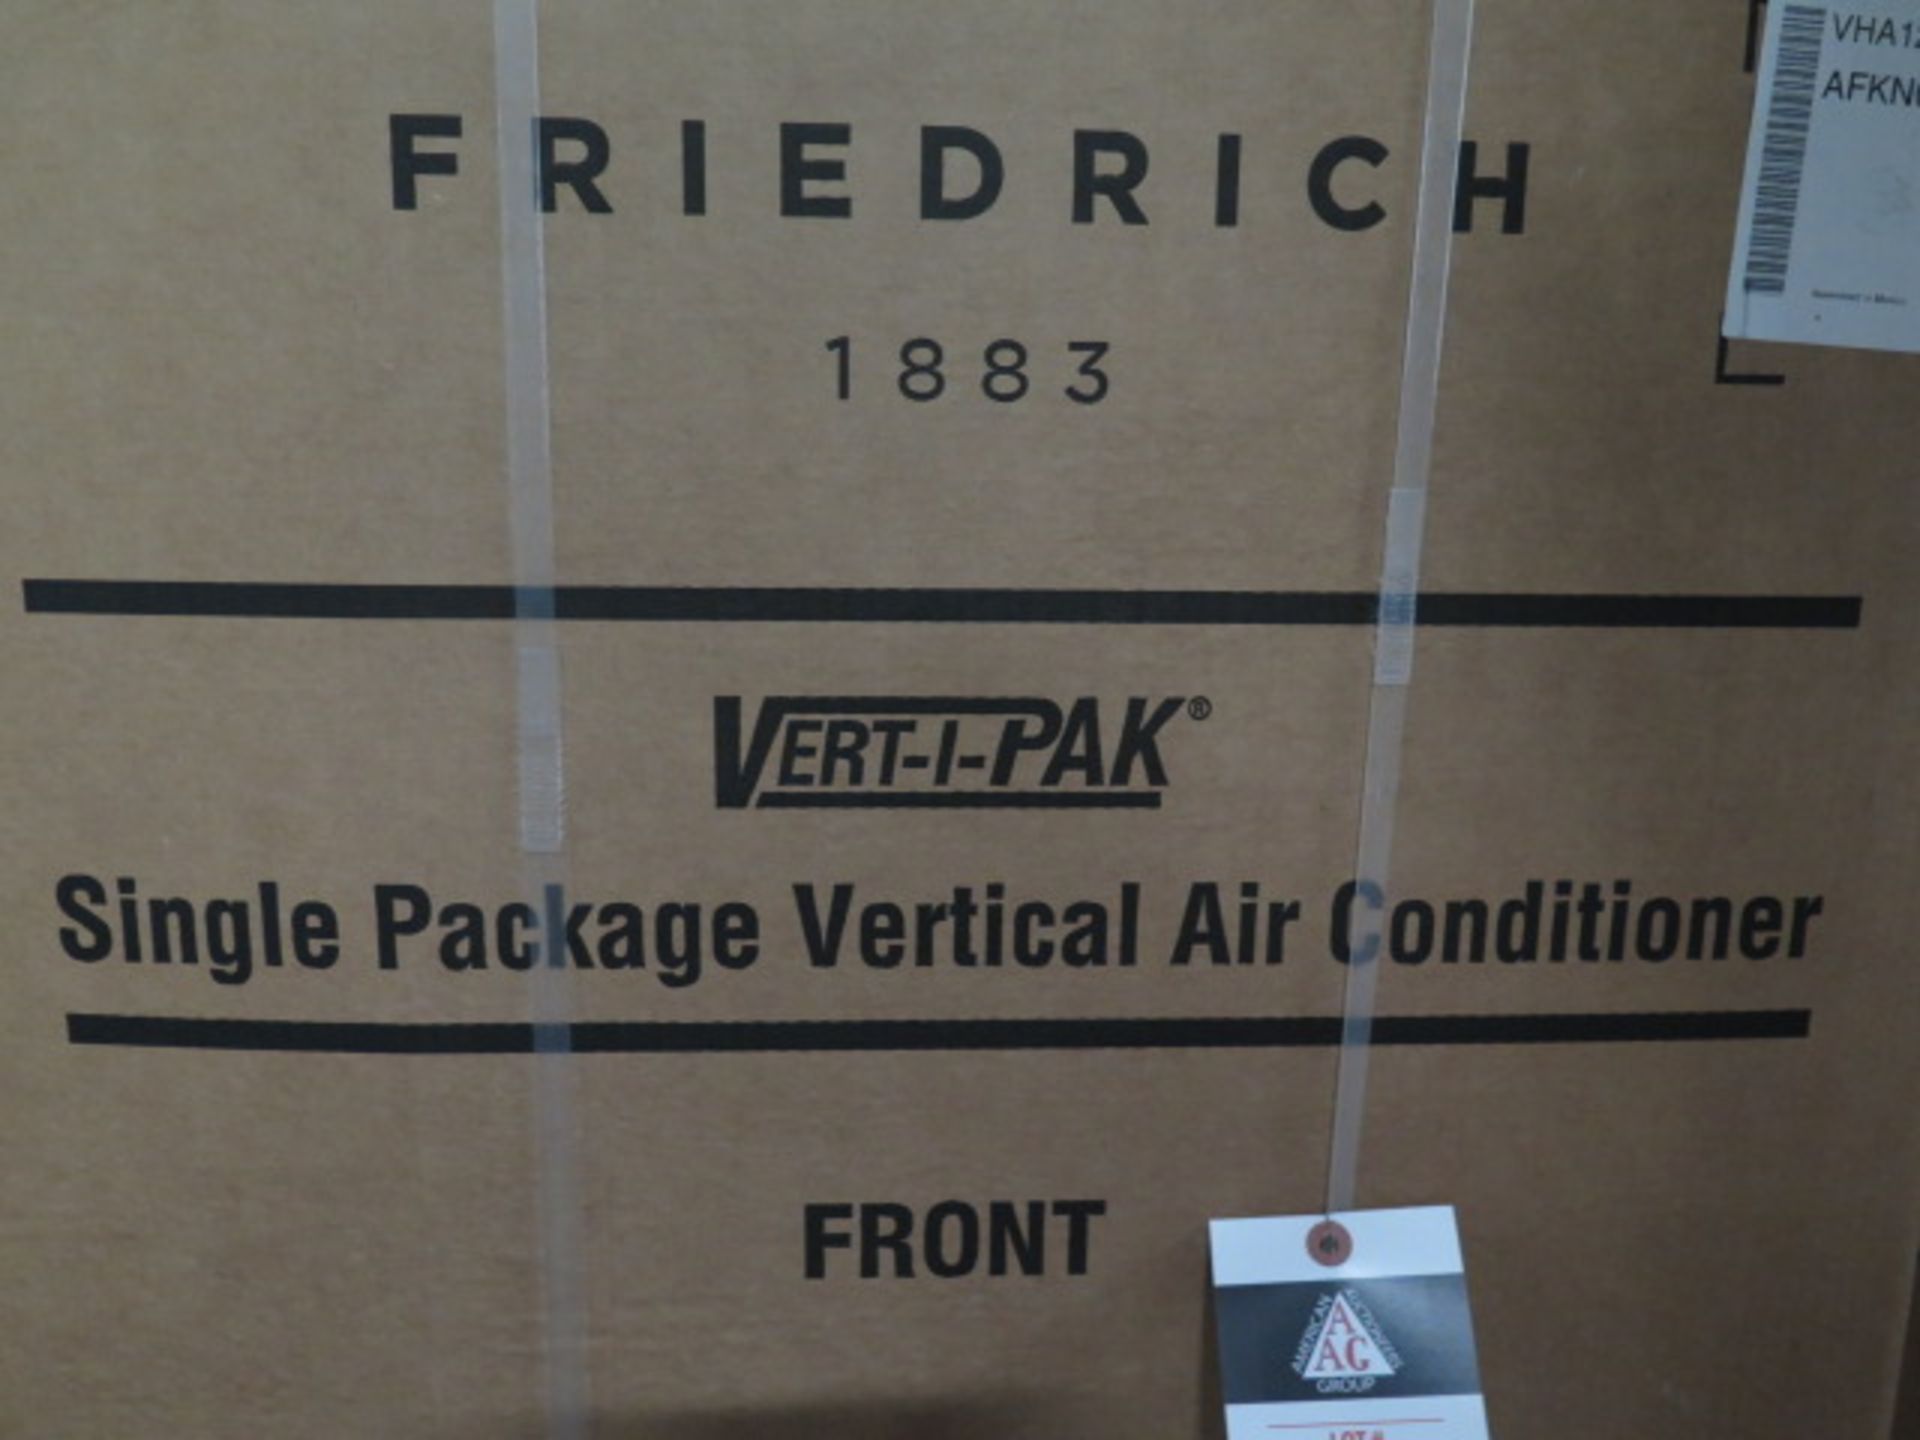 Friedrich VHA12K25RTN Hotel Style 1 Ton Single Package Vertical Air Conditioner s/n AFKN01926 w/ 9, - Image 3 of 4